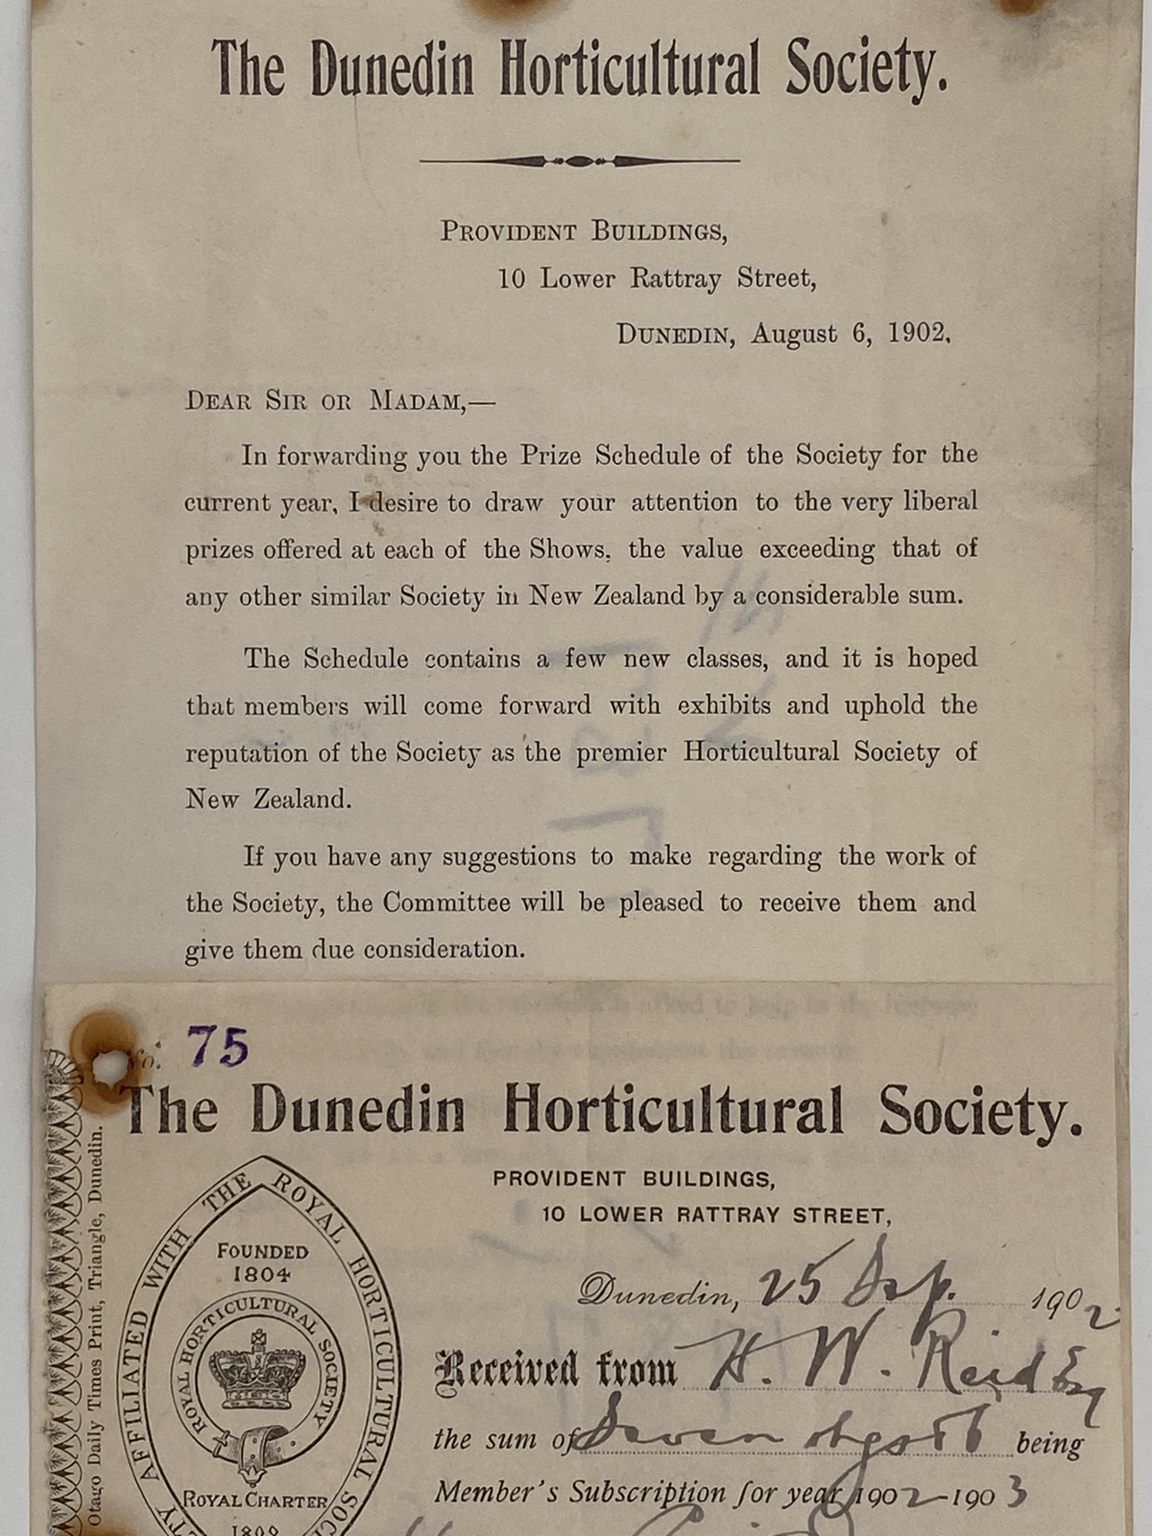 ANTIQUE INVOICE / RECEIPT: The Dunedin Horticultural Society 1902